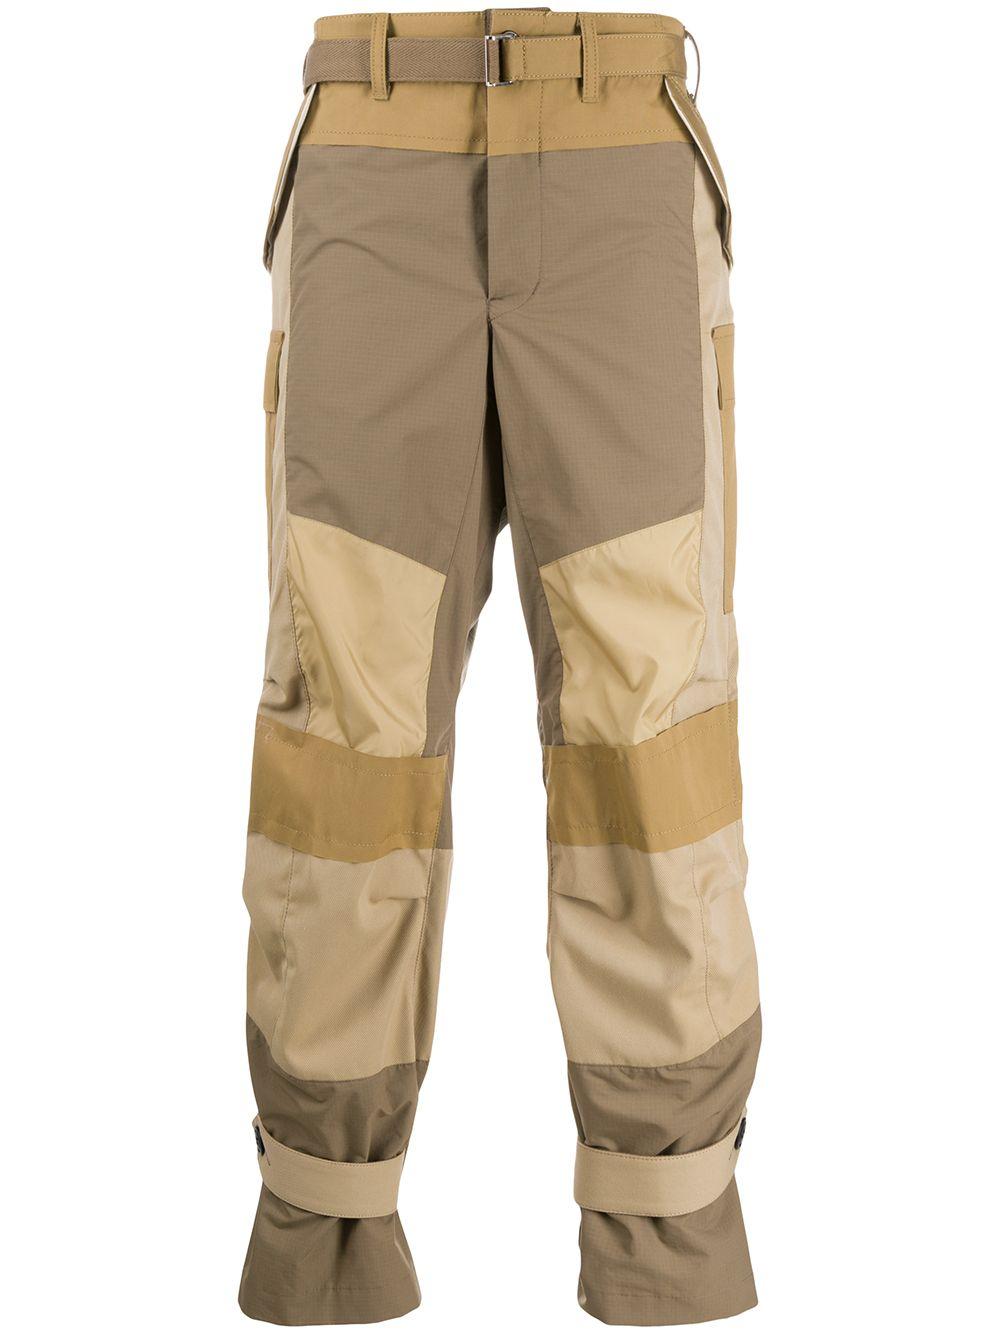 Sacai Parachute Pants With Straps in Natural for Men - Lyst